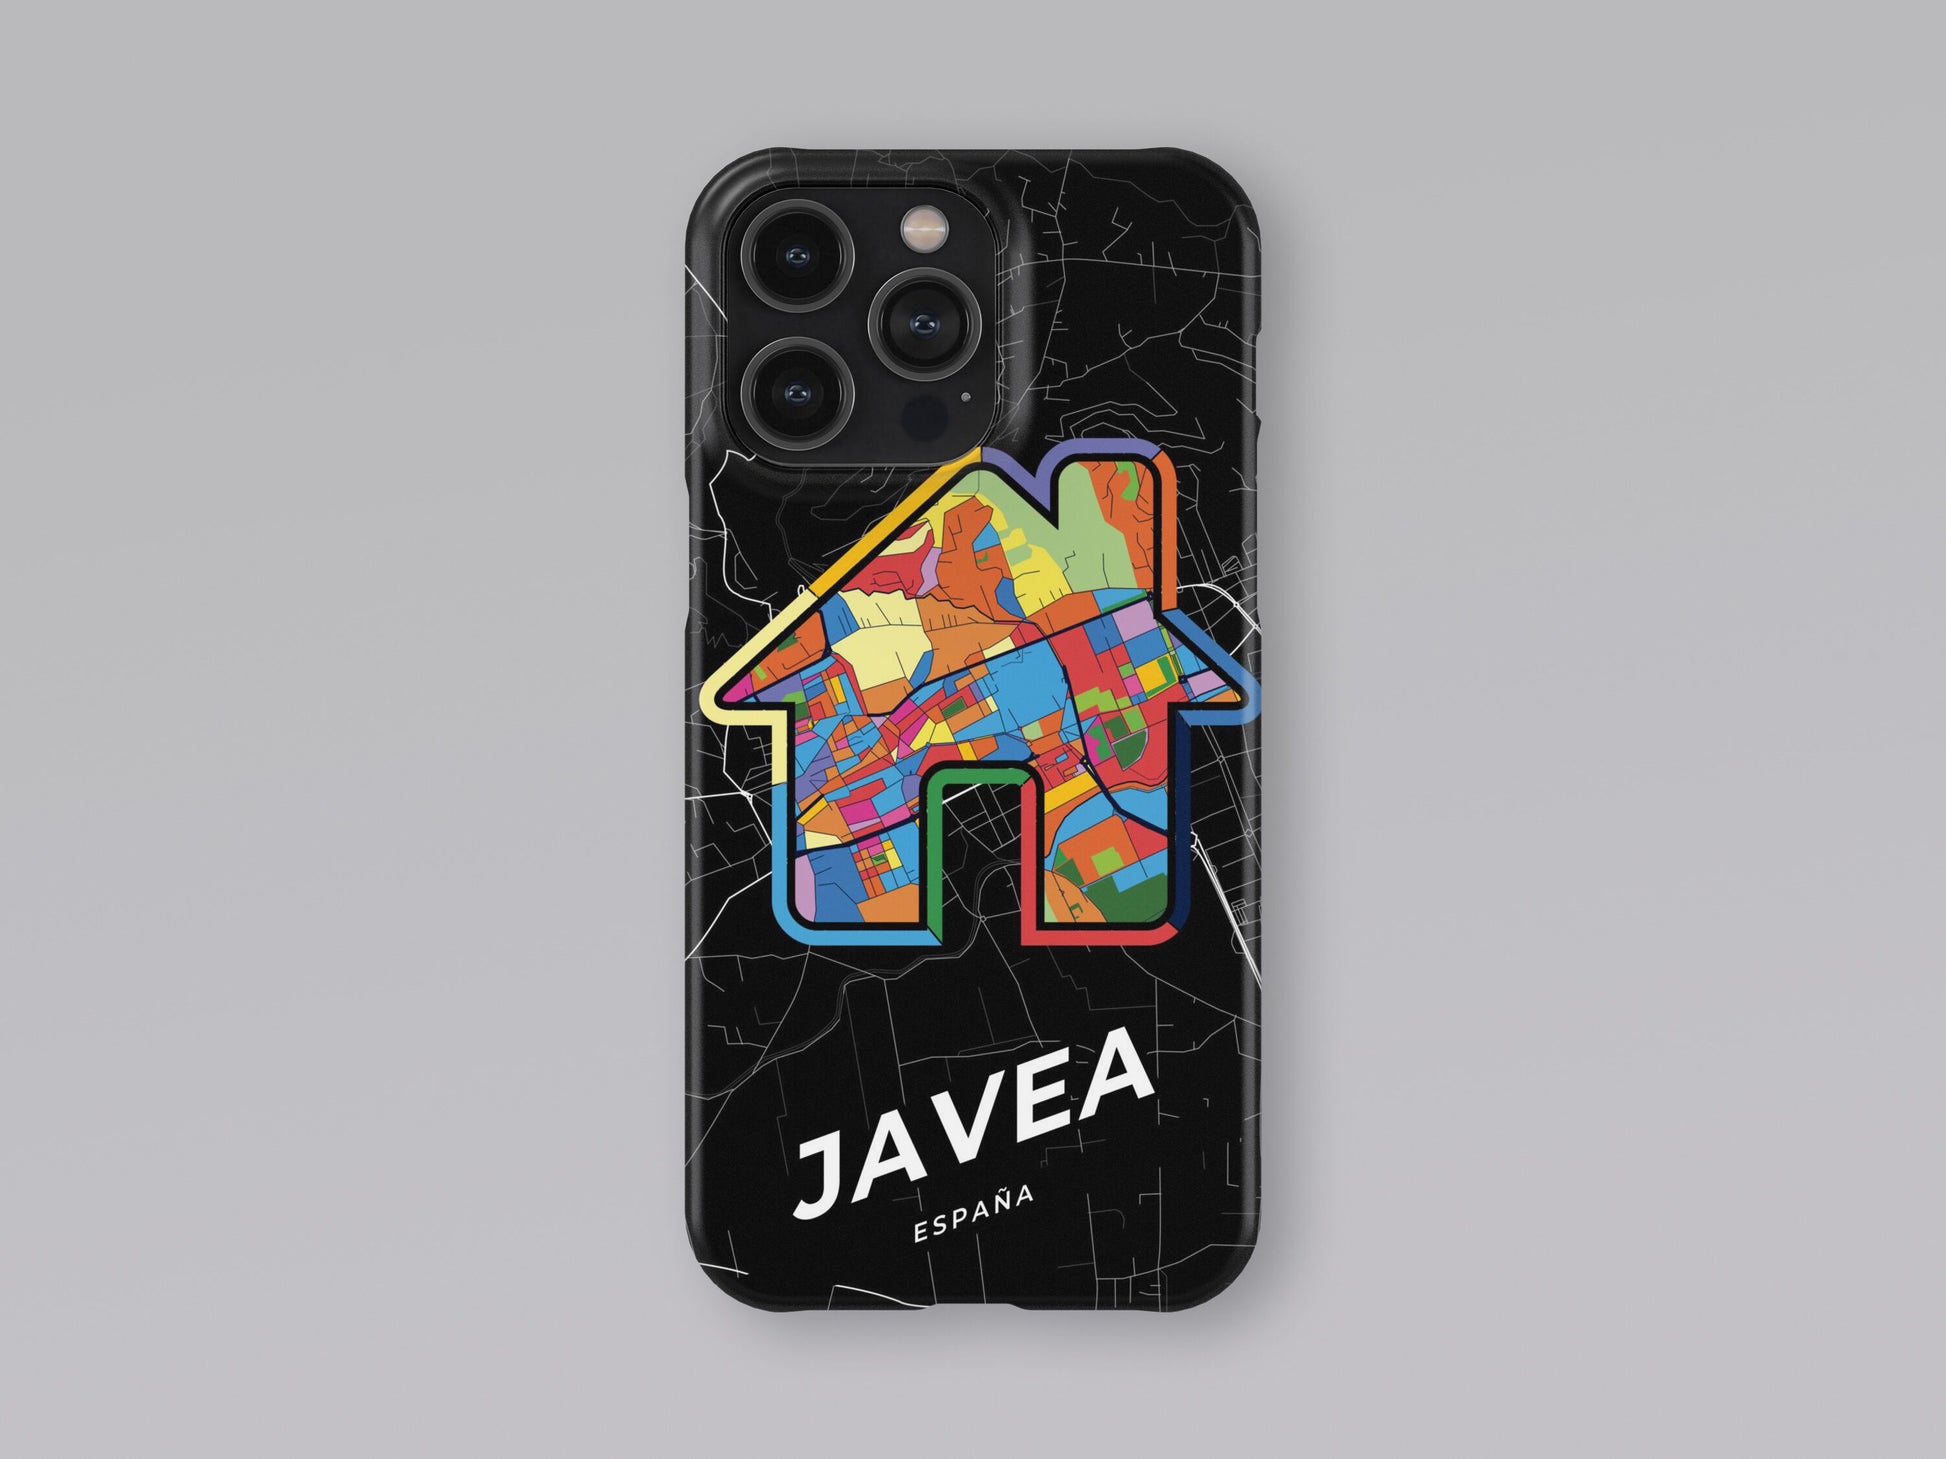 Javea Spain slim phone case with colorful icon. Birthday, wedding or housewarming gift. Couple match cases. 3